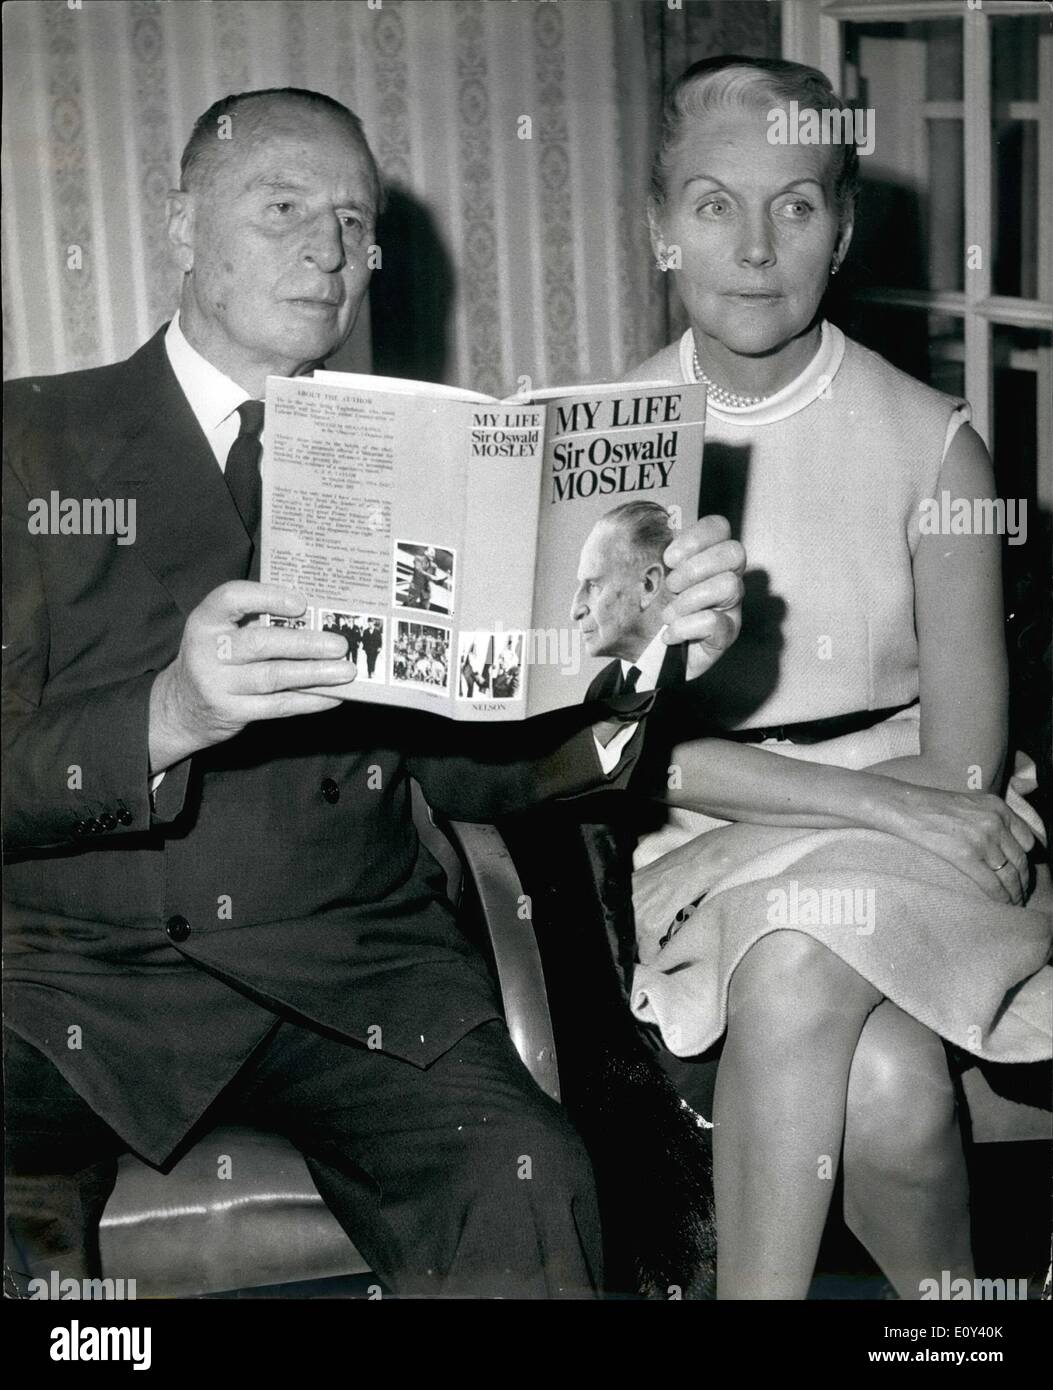 Oct. 10, 1968 - SIR OSWALD MOSLEY HOLDS PRESS CONFERENCE TO LAUNCH HIS AUTOBIOGRAPHY ''MY LIFE'' PHOTO SHOWS: SIR OSWALD MOSLEY, the one-time leader of the Blackshirt Movement in Britain, pictured with his book ''MY LIFE'' as he poses with his wife at the press conference held at the Cafe Royal to launch his tbook his evening. Stock Photo